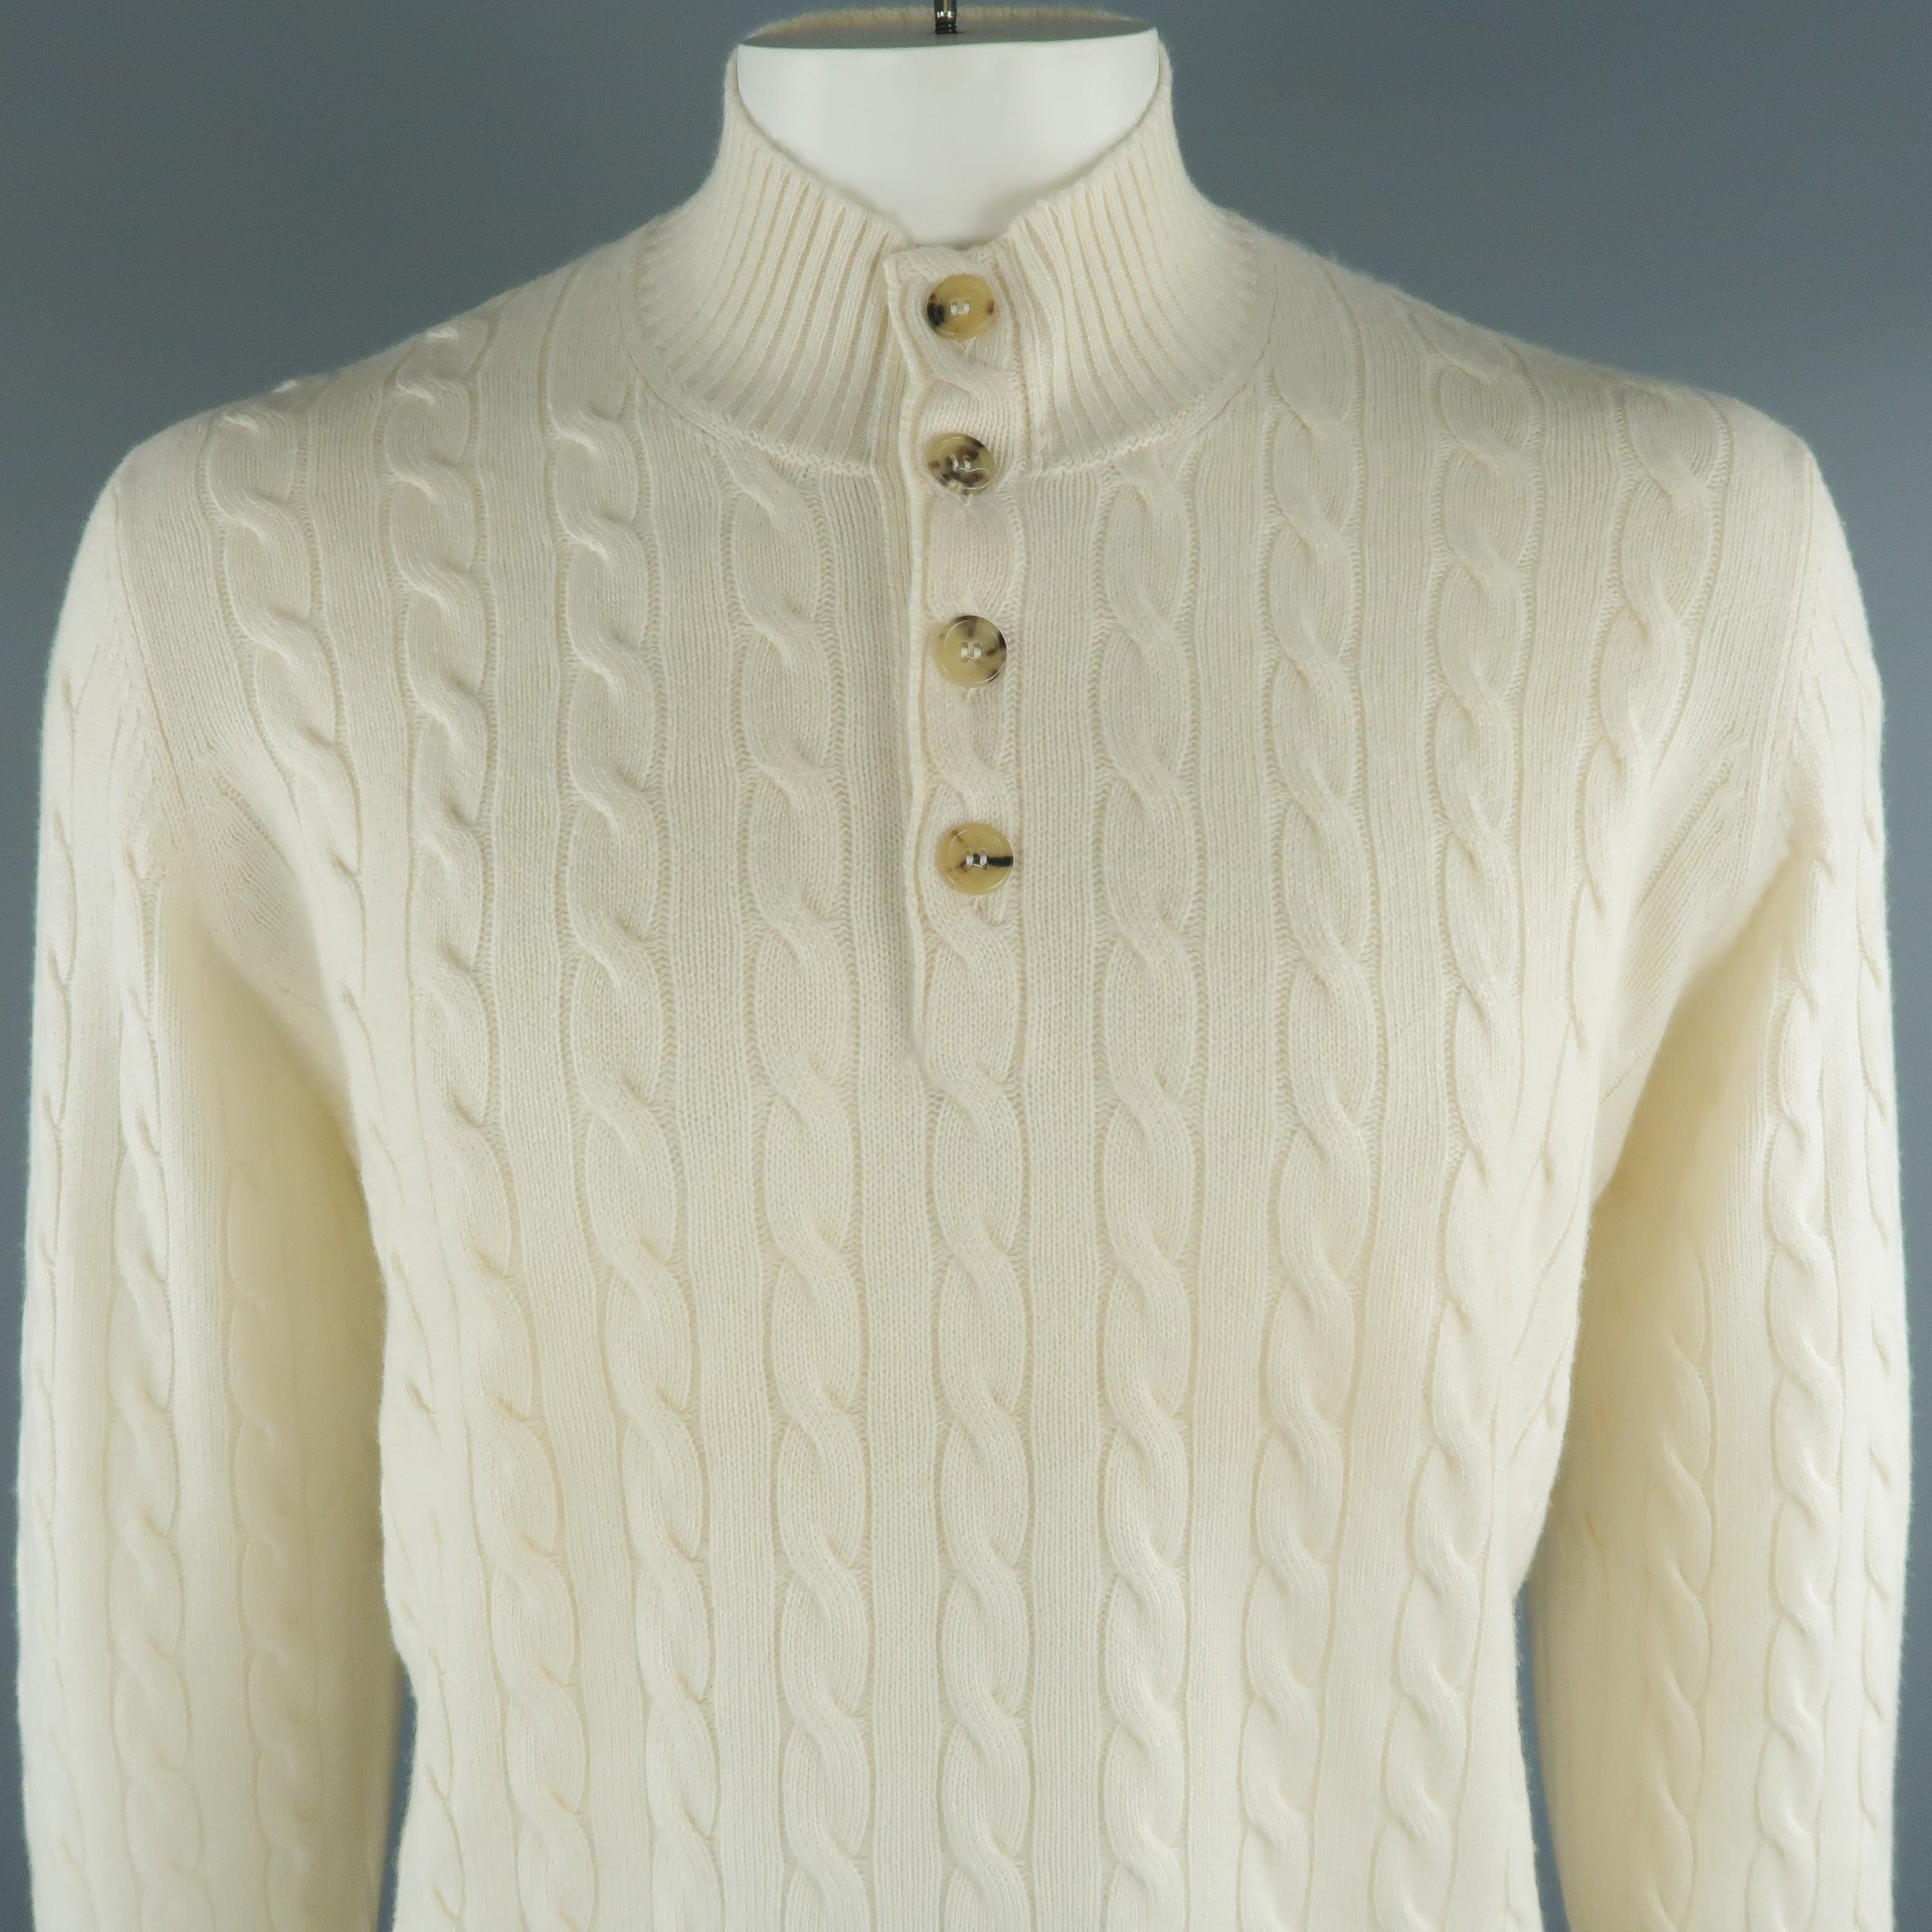 BRUNELLO CUCINELLI henley sweater come in 100% cashmere in a cream tone, cable knit, with ribbed cuffs and waistband. Made in Italy.
 
New with Tags.
Marked: 54 IT
 
Measurements:
 
Shoulder: 17 in.
Chest: 46 in.
Sleeve: 26.5  in.
Length: 28  in.